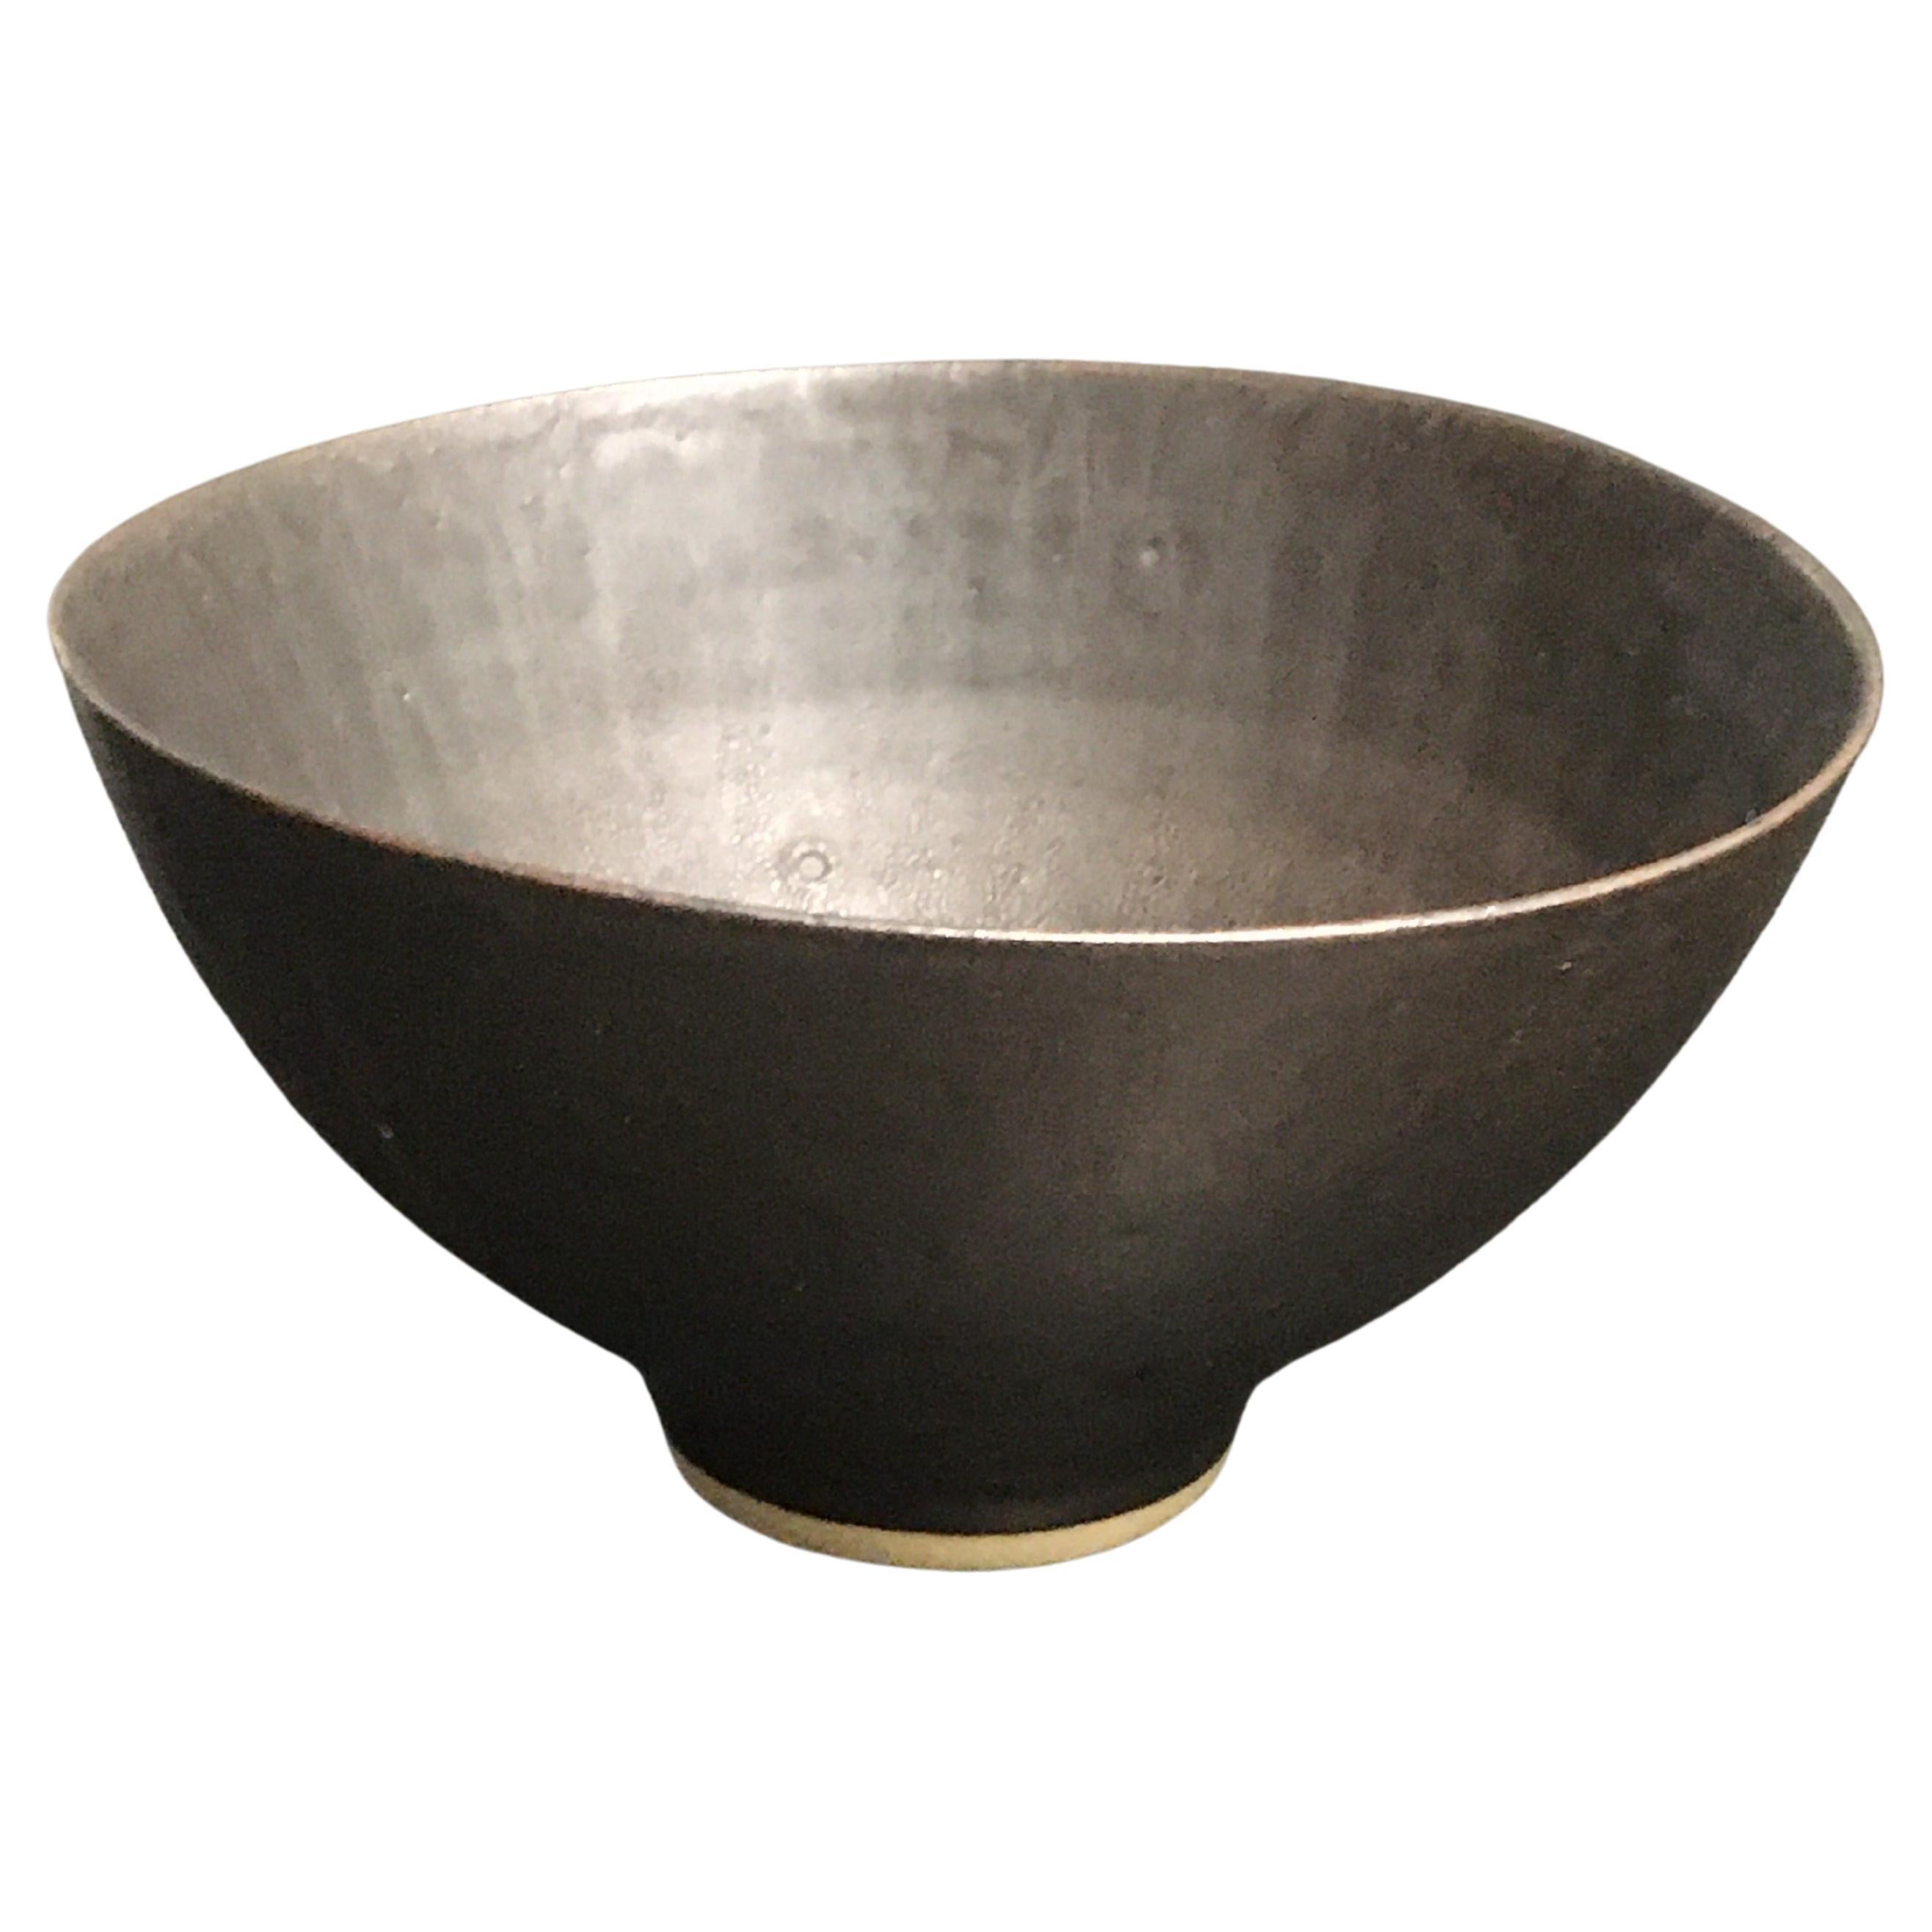 lucie rie bowl